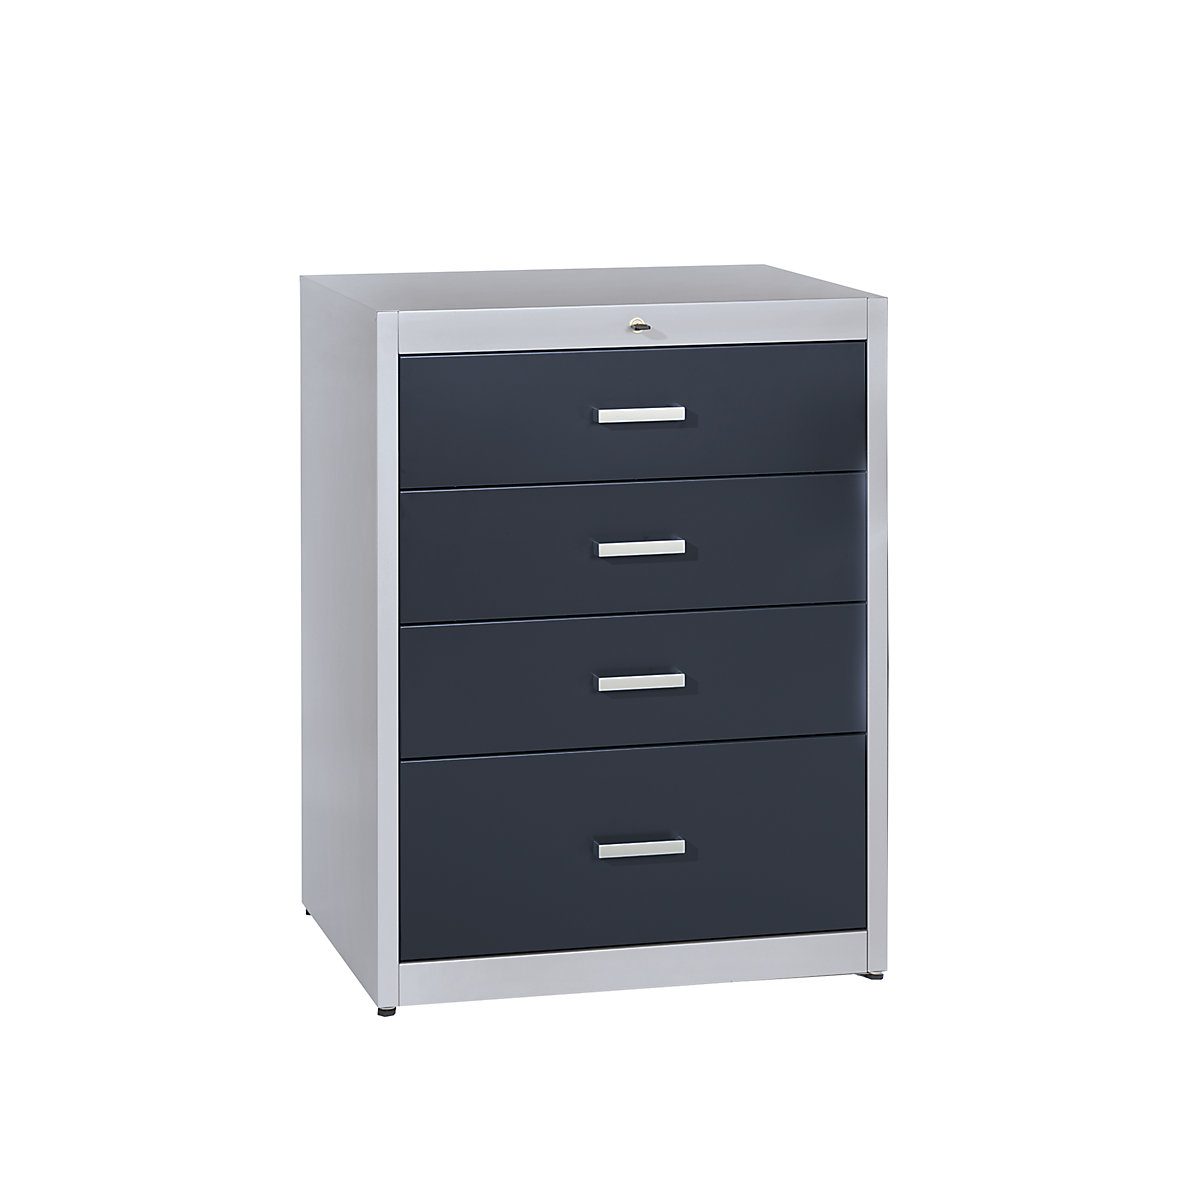 Card file cabinet, bar handles – mauser, 4 drawers, standard retraction mechanism, 3-track, white aluminium / charcoal-4